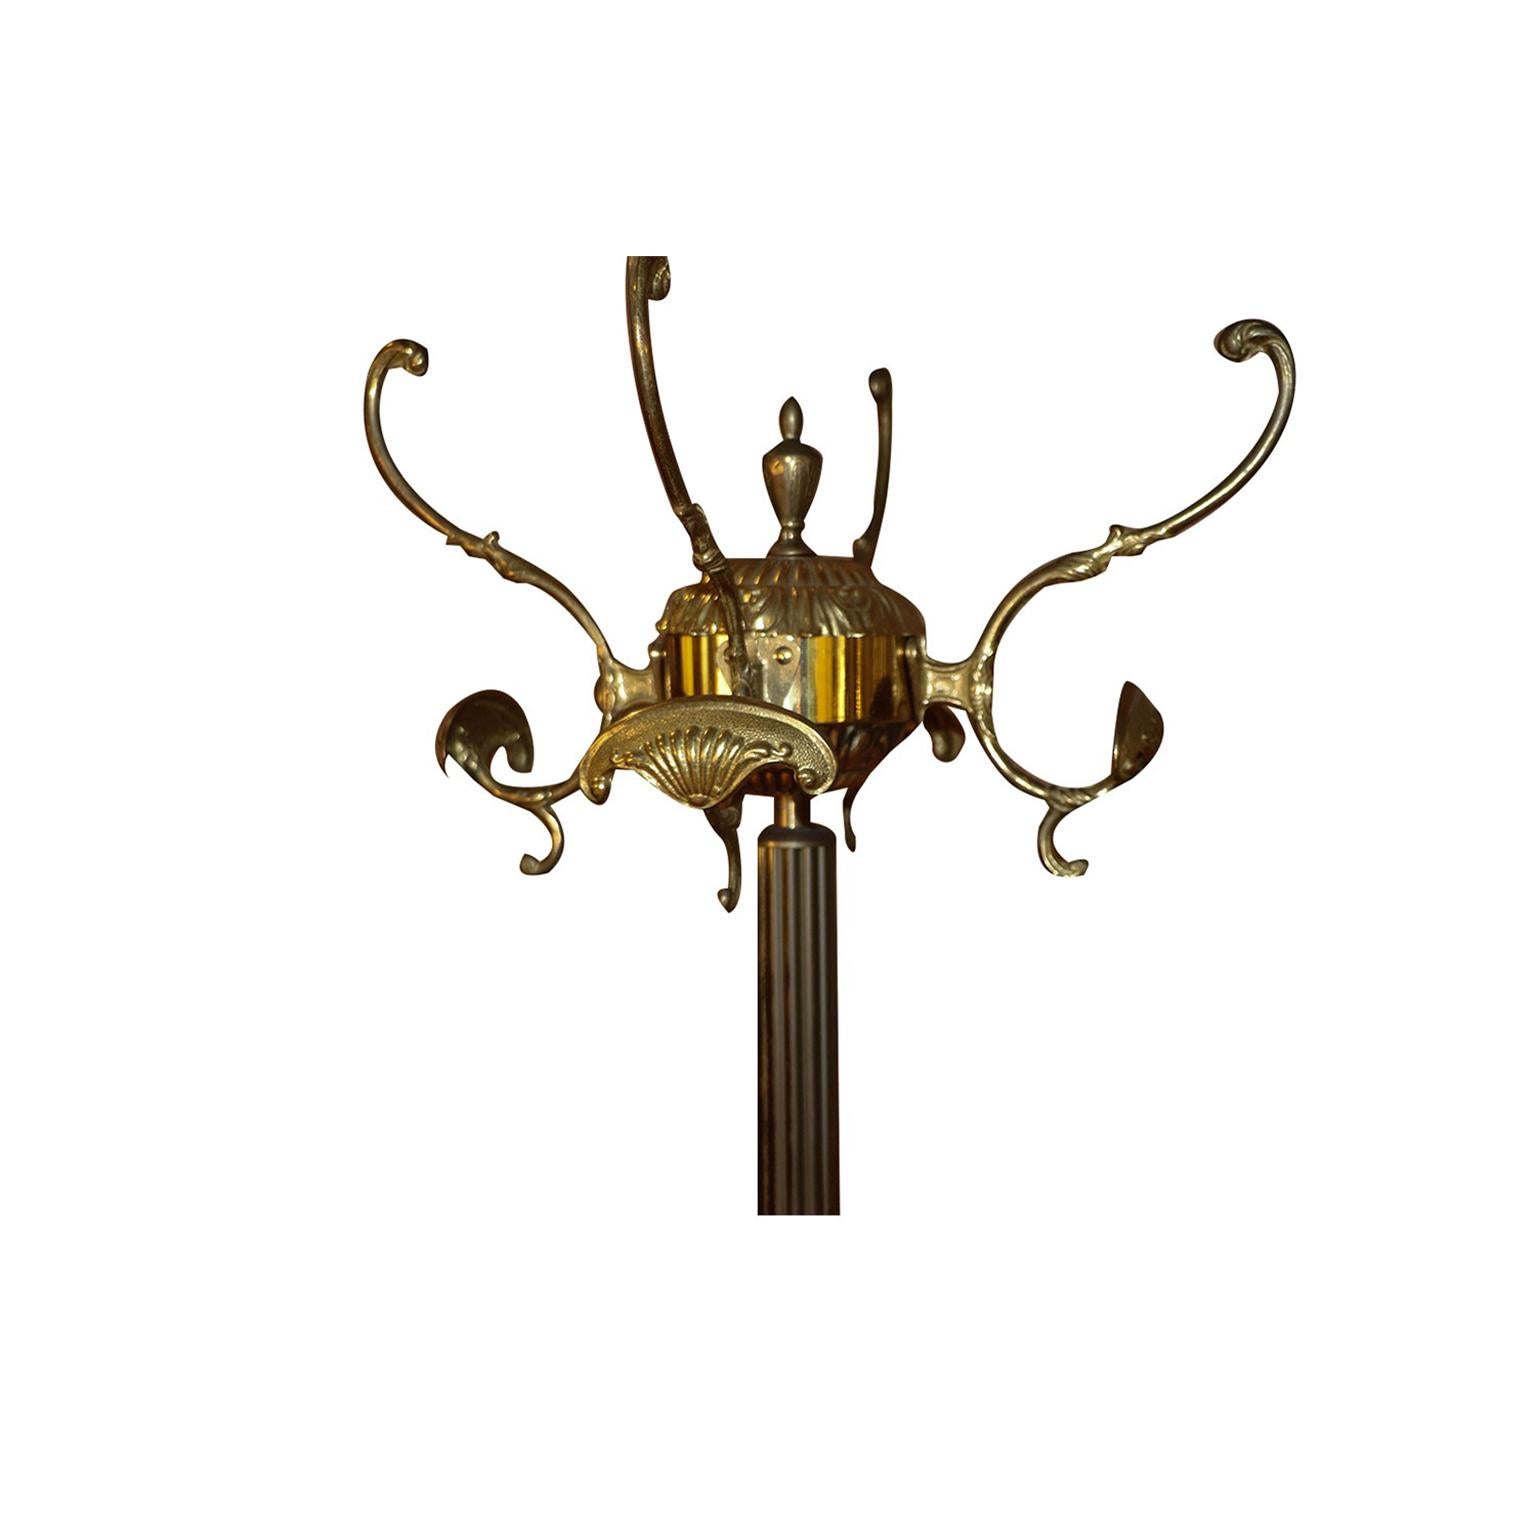 A beautiful solid brass vintage ornate French Lion hall tree, coat/hat stand. The brass body of this stand is well designed and thoughtfully crafted. Features a molded brass top which turns 360 degrees, the four sturdy coat hooks surround the brass